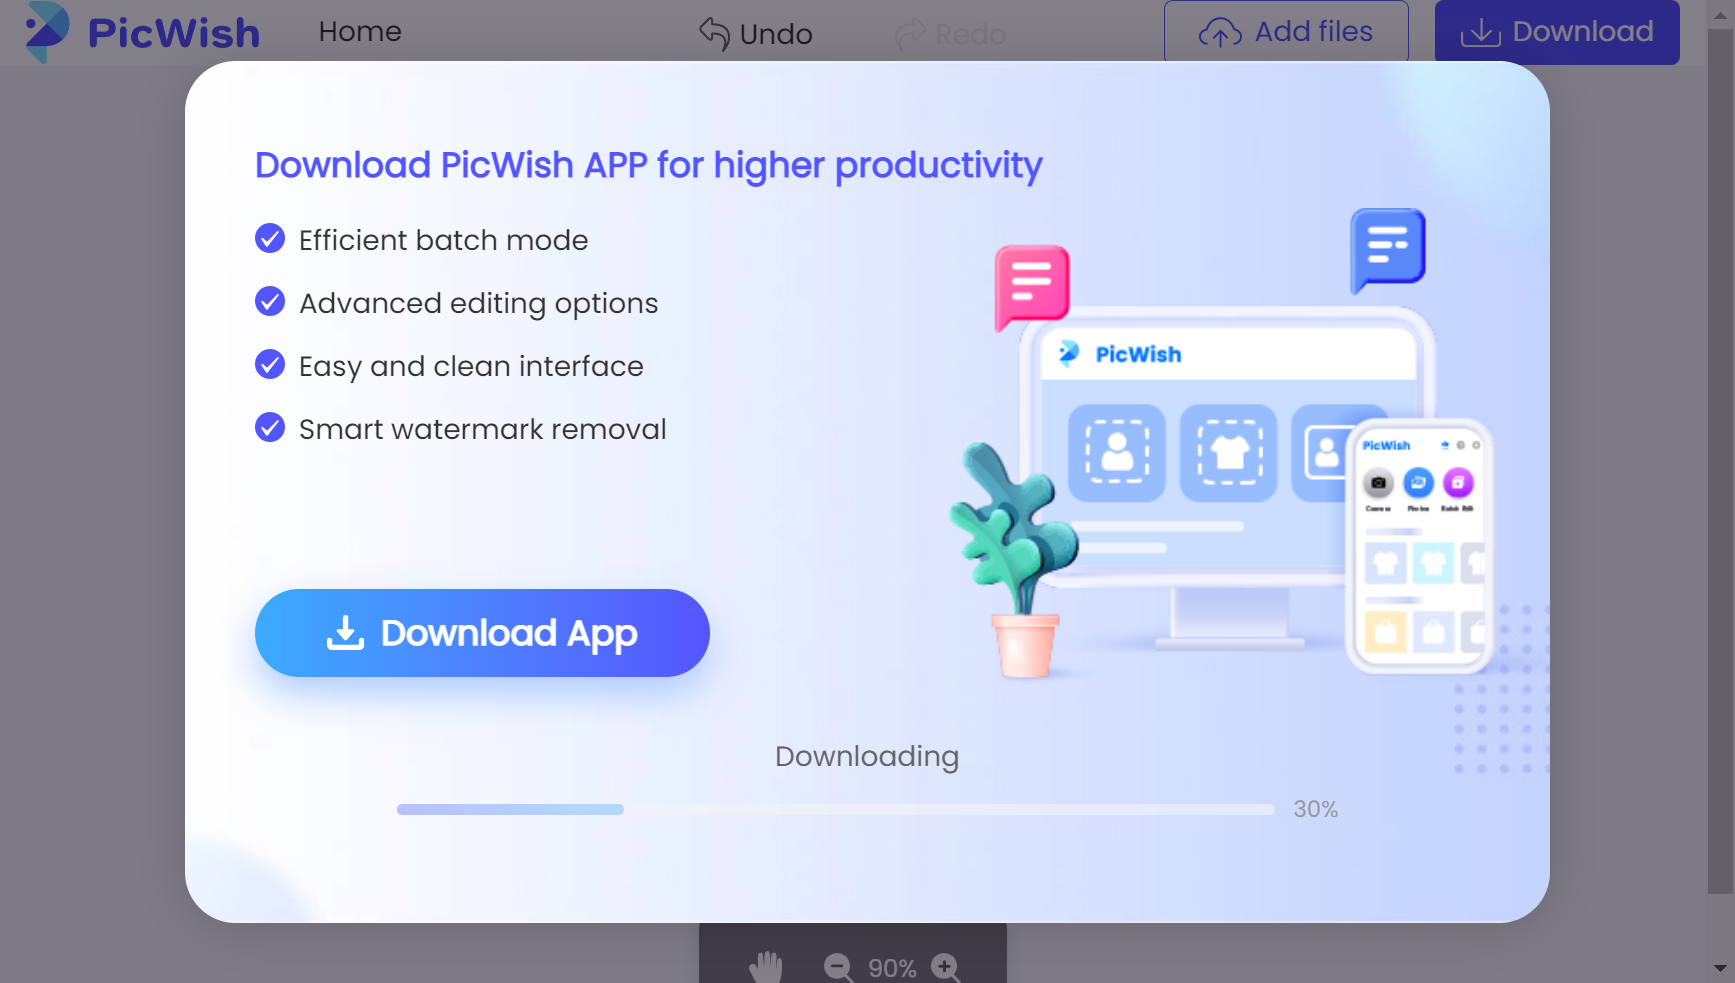 PicWish - image downloading (after clicking Download button).